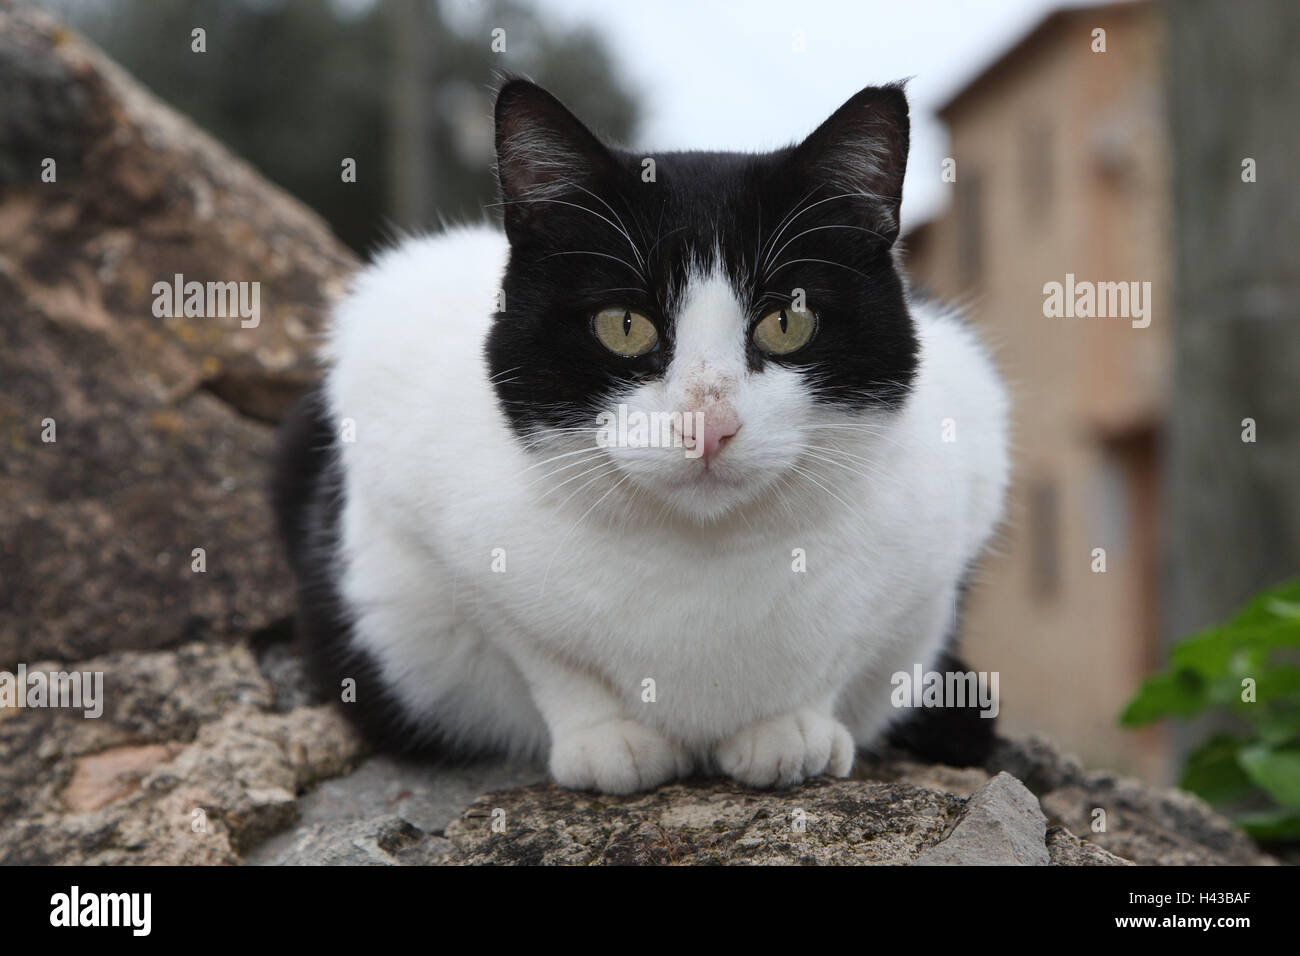 Cat, black-and-white, crouch, defensive wall, animals, mammals, pets, small cats, Felidae, domesticates, house cat, look, without Lord, day release prisoner, stray, street cat, front view, animal portrait, cat's portrait, individually, alone, outside, garden defensive wall, Spain, Stock Photo